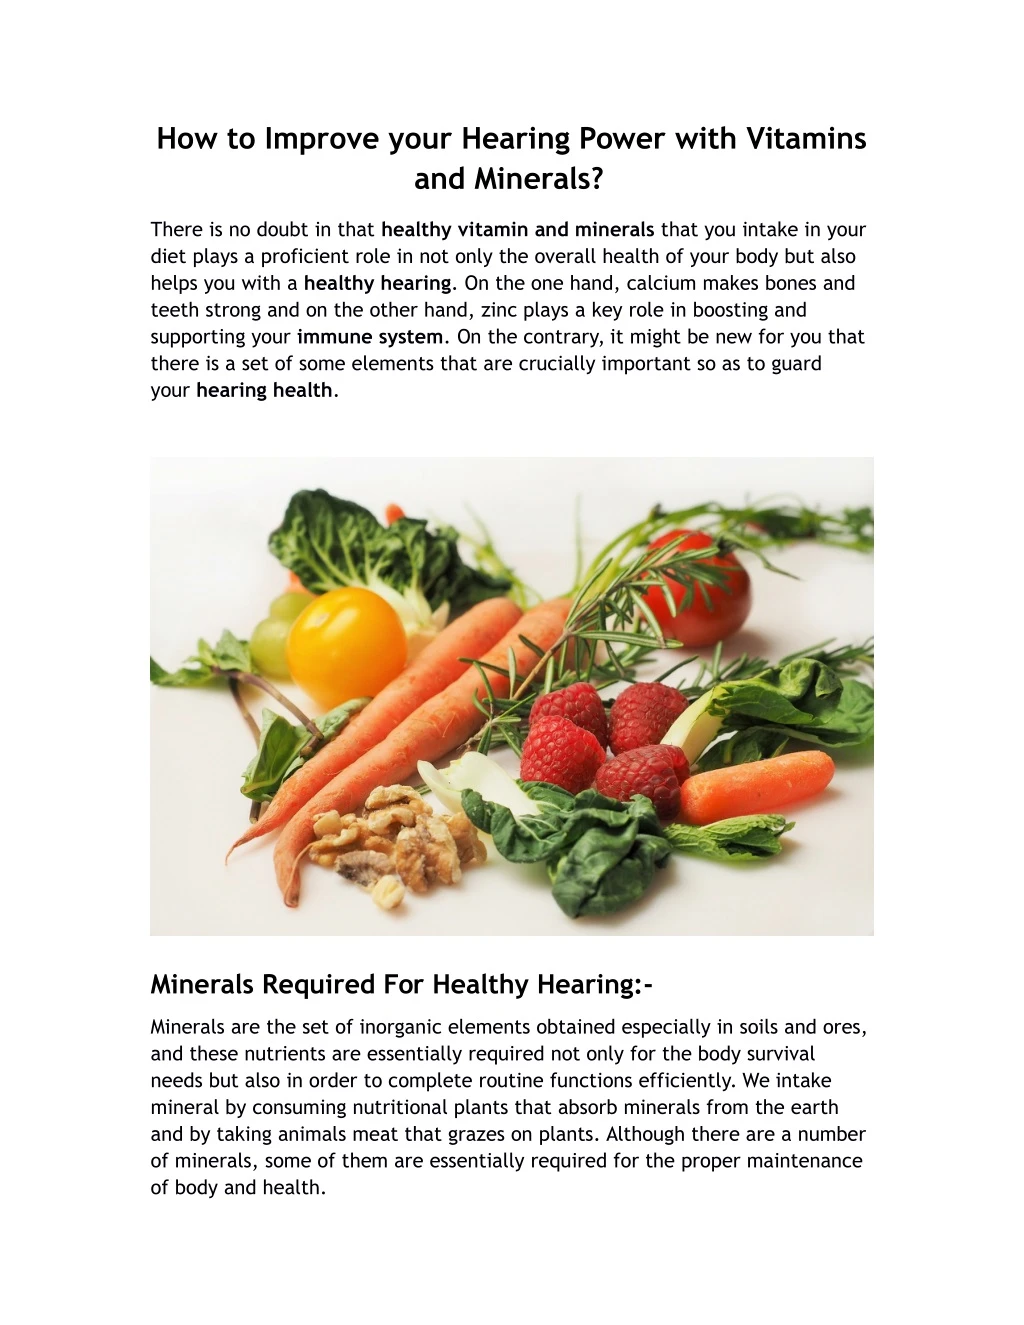 how to improve your hearing power with vitamins